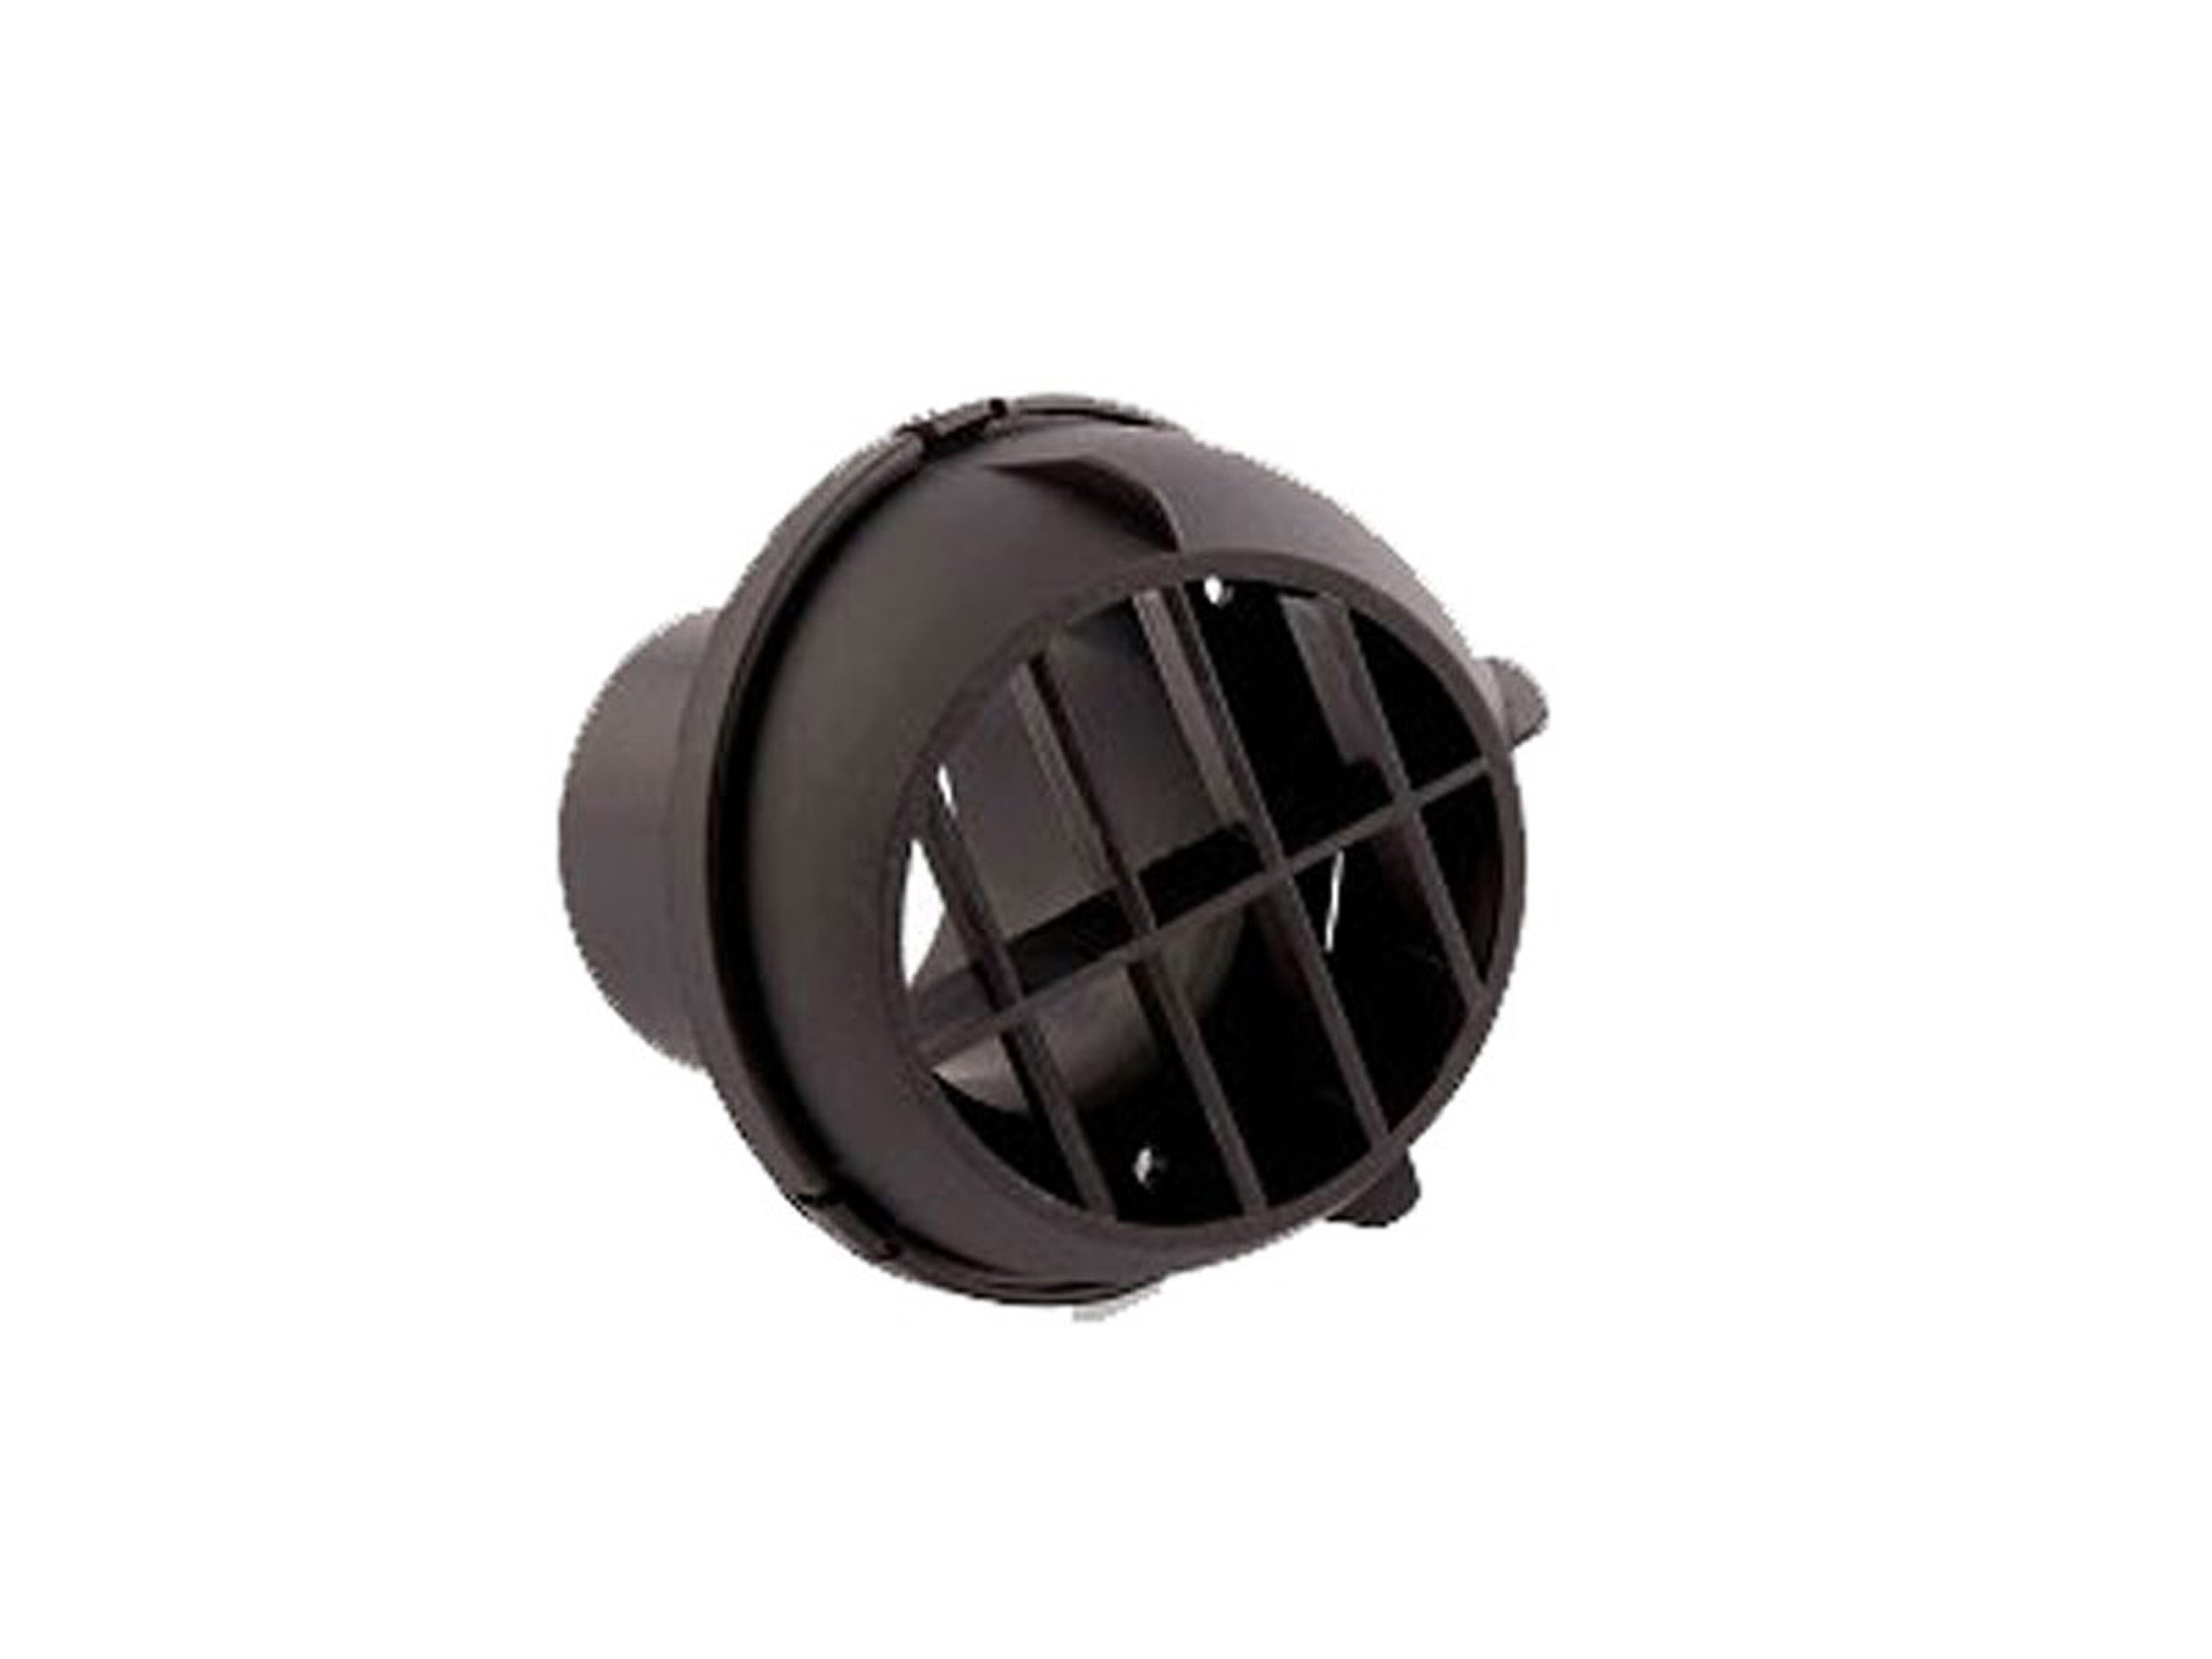 Webasto air diffuser, rotatable, with 60mm connection (for Cubby Box Heater Base)